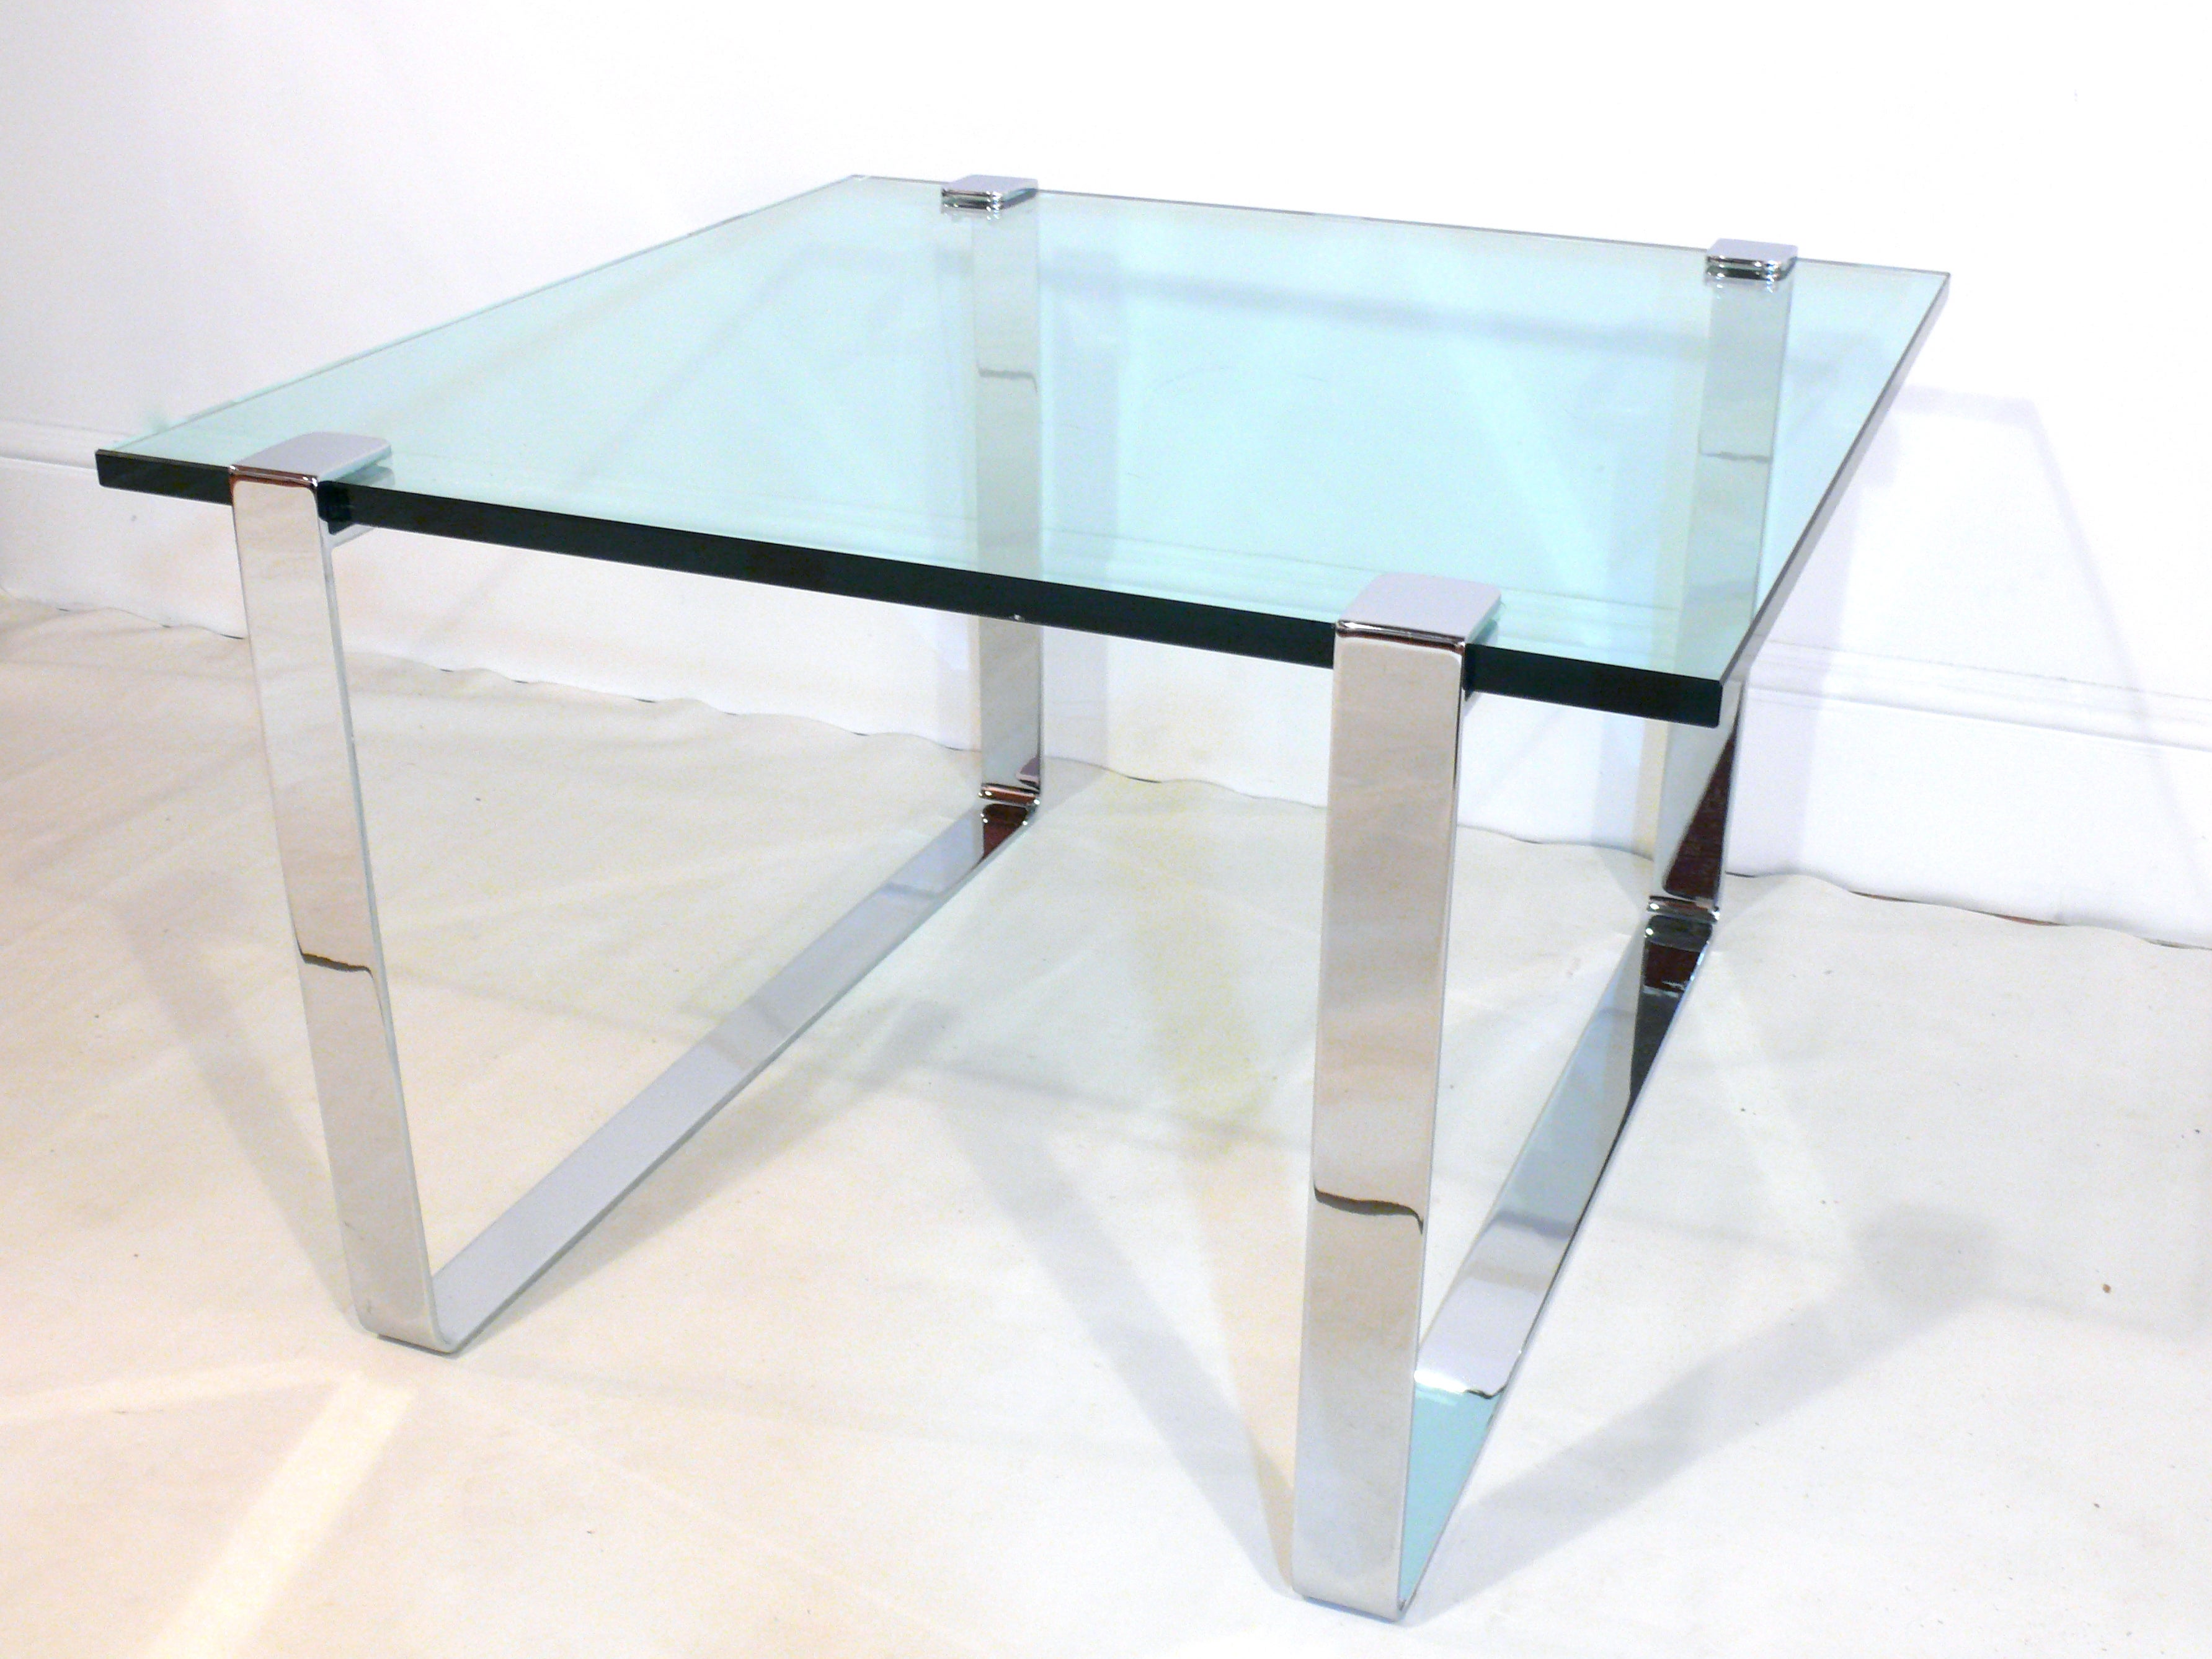 1960s Chrome and Glass Coffee Table